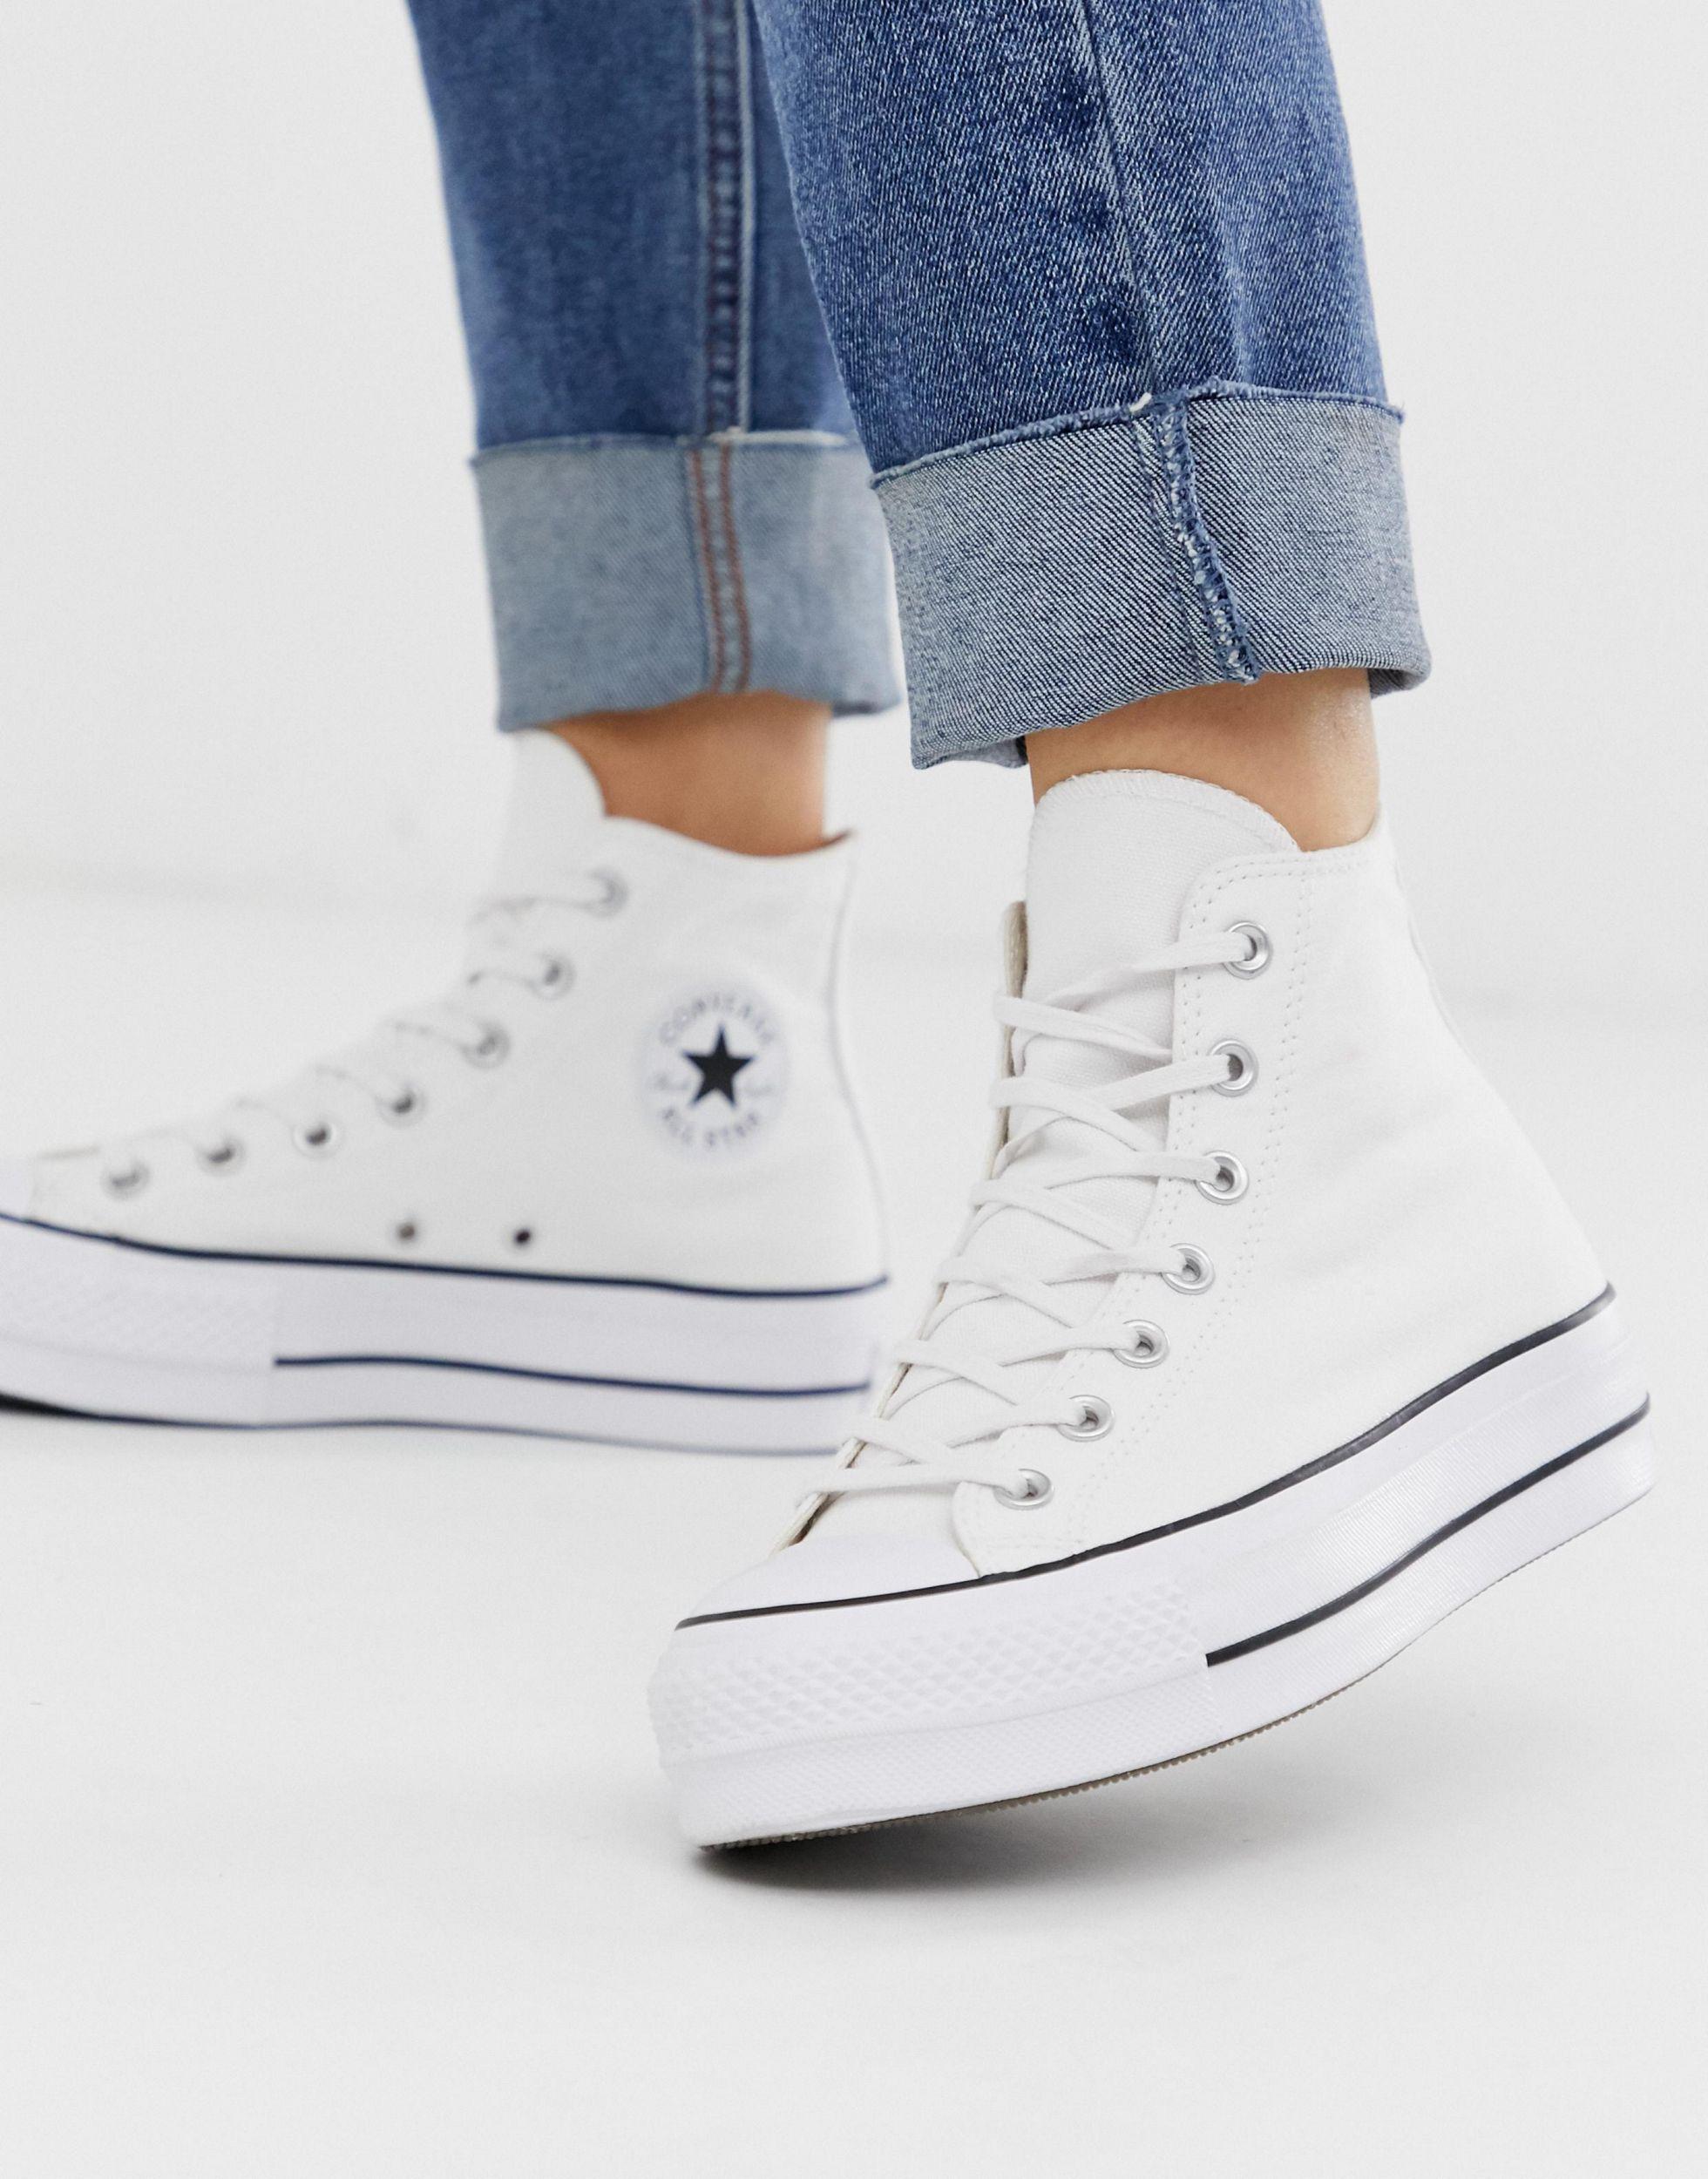 Converse Chuck Taylor All Star Hi Lift Sneakers in White | Lyst حناء اليد